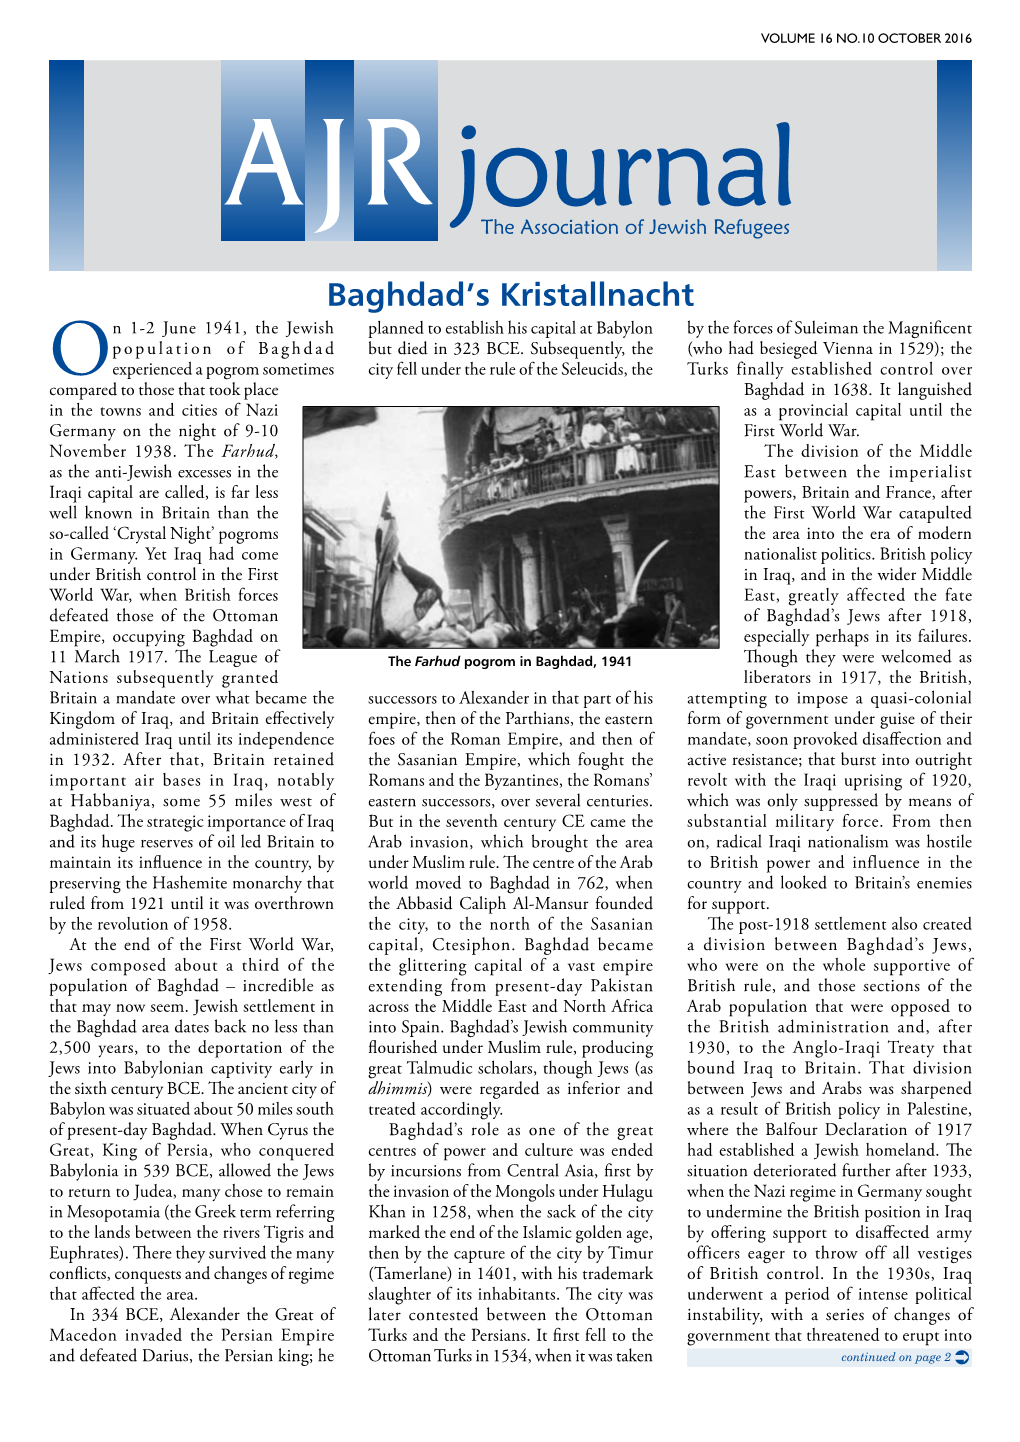 Baghdad's Kristallnacht  Continued Outright Violence